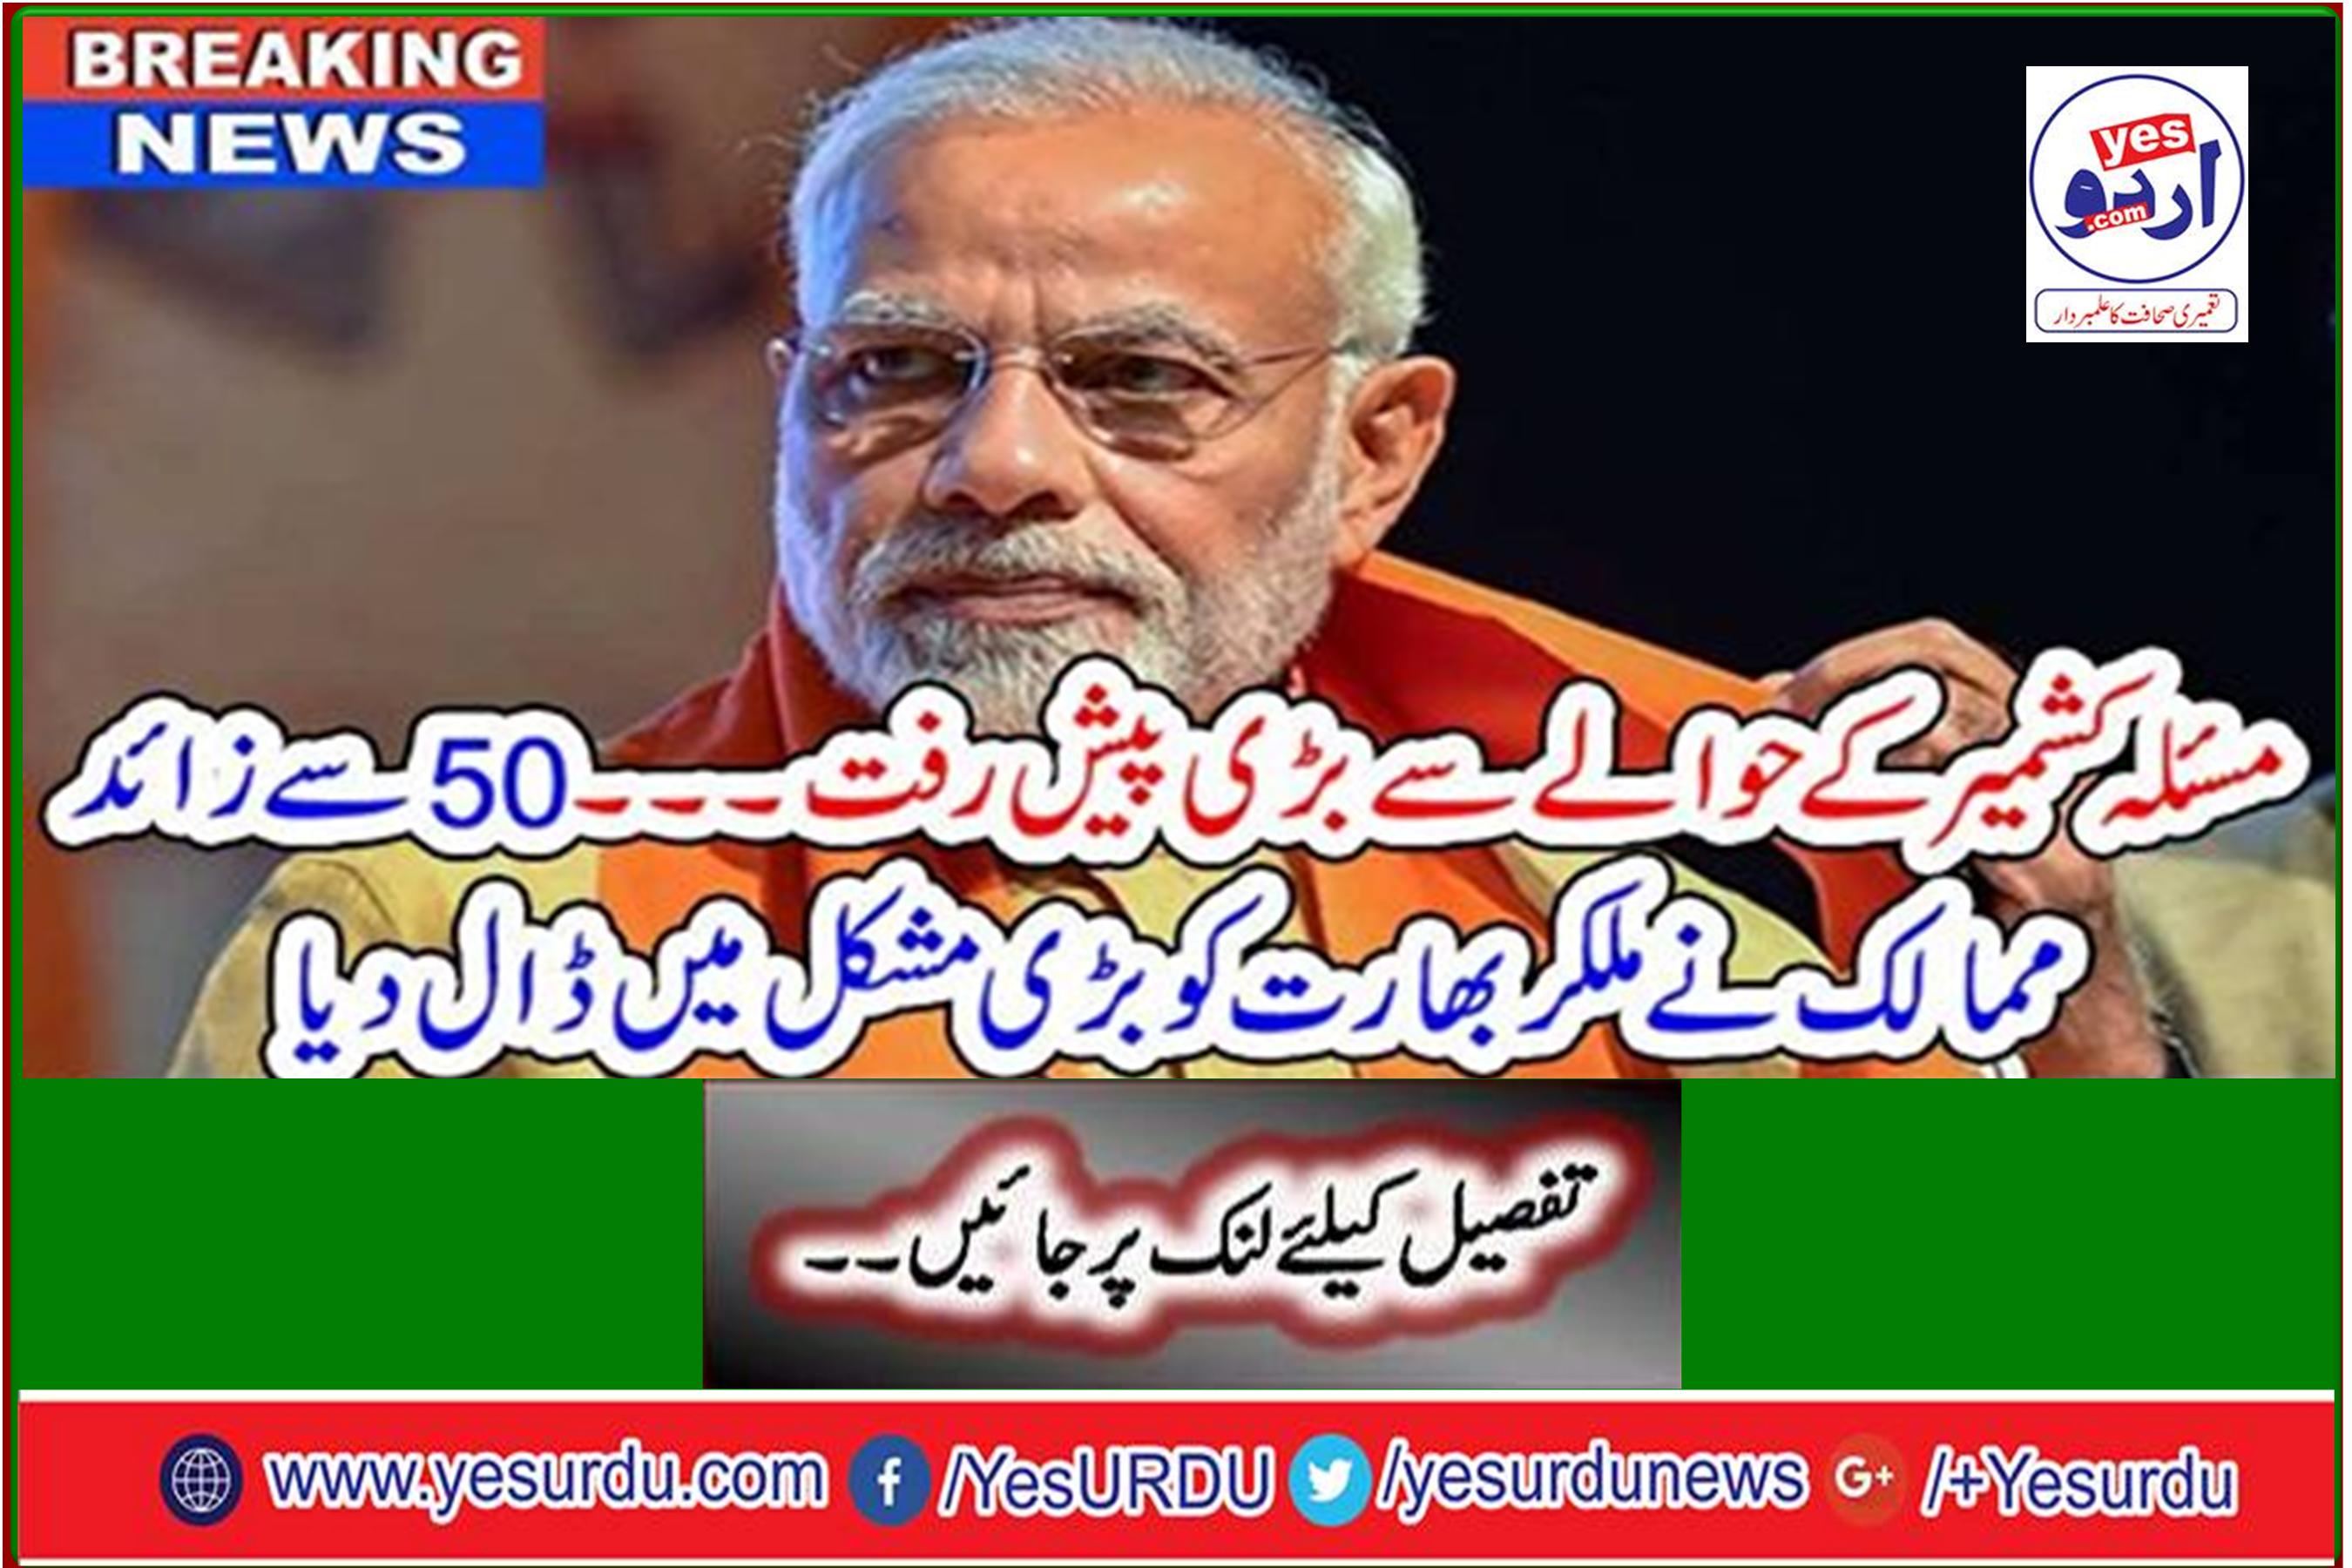 Breaking News: Great progress on Kashmir issue ... More than 50 countries put India in great trouble